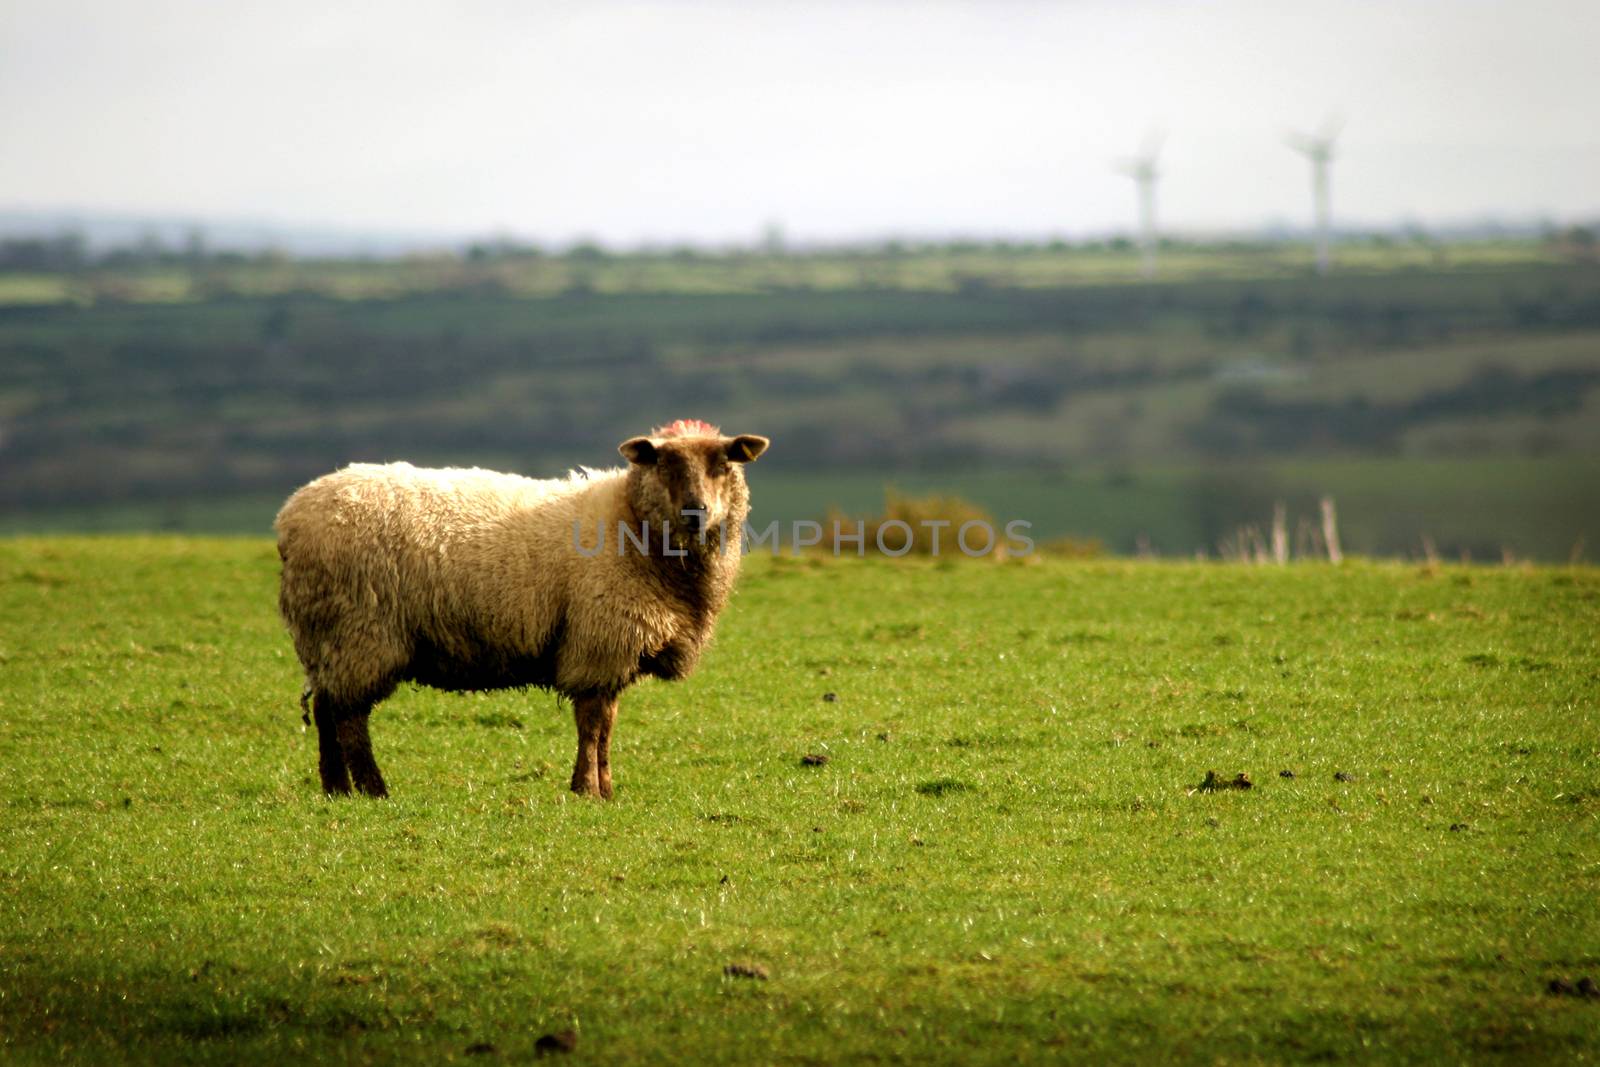 A solitary sheep staring.